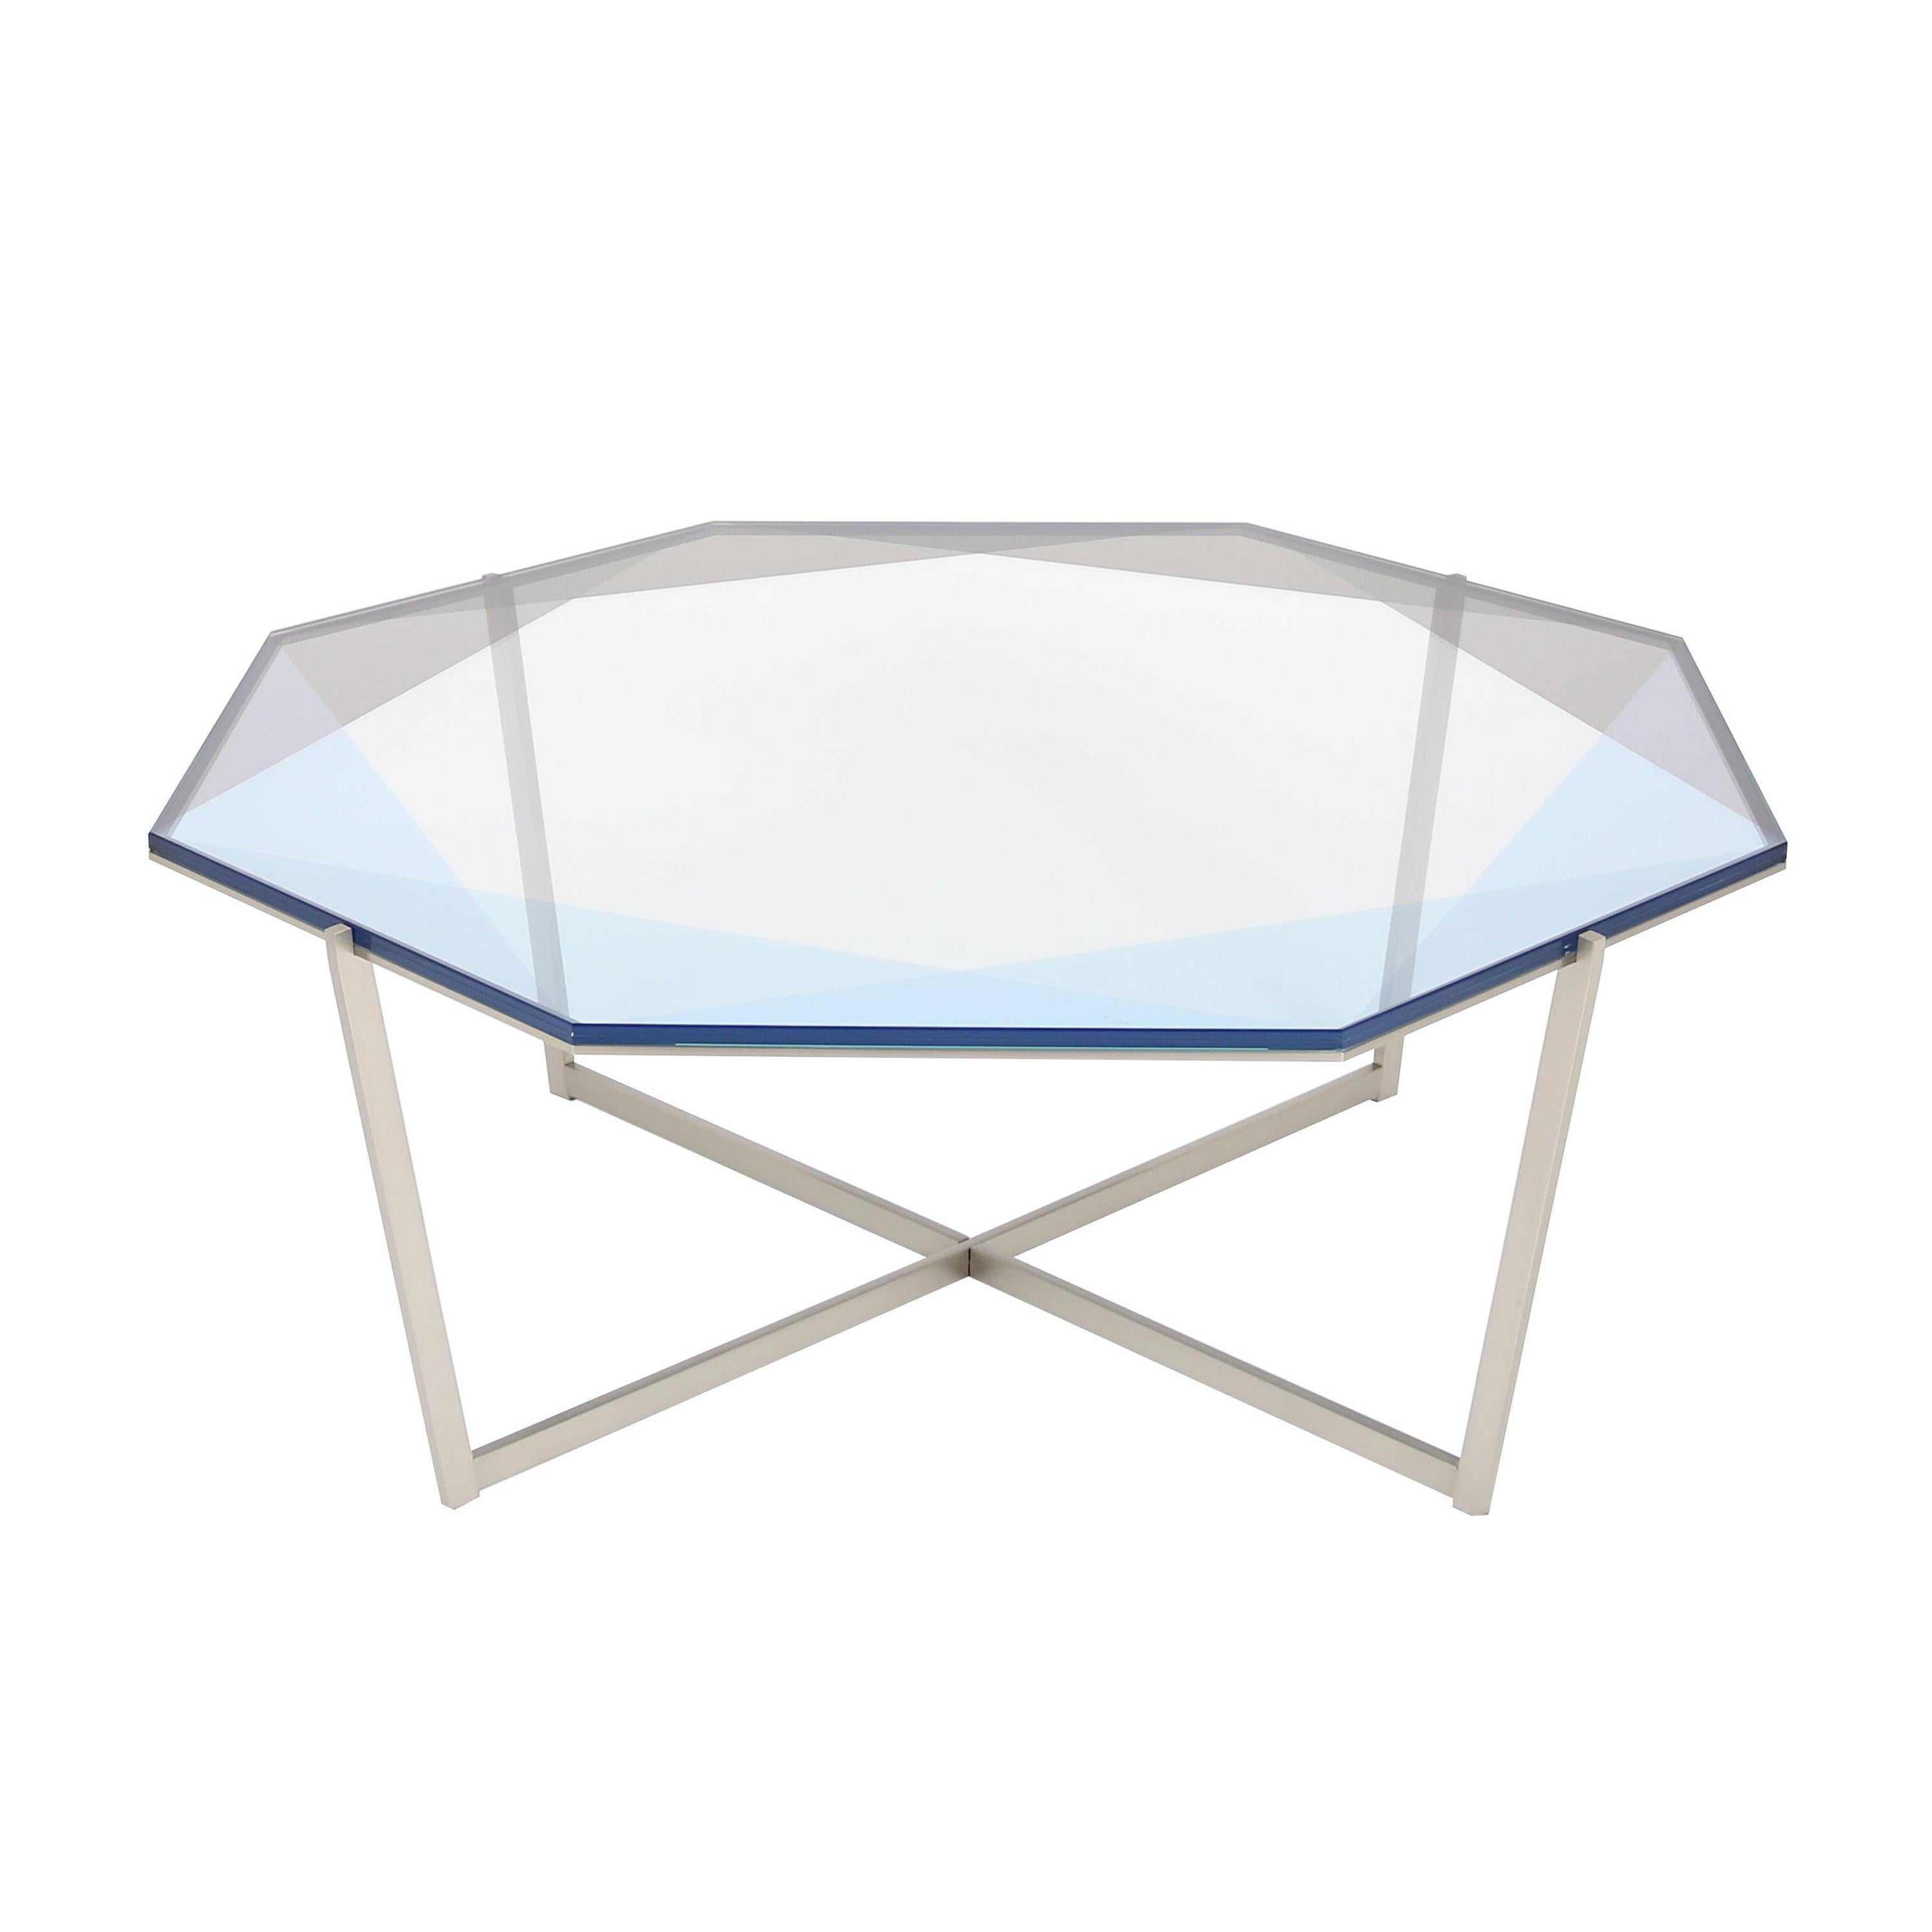 Gem Octagonal Coffee Table-Blue Glass with Stainless Steel Base by Debra Folz